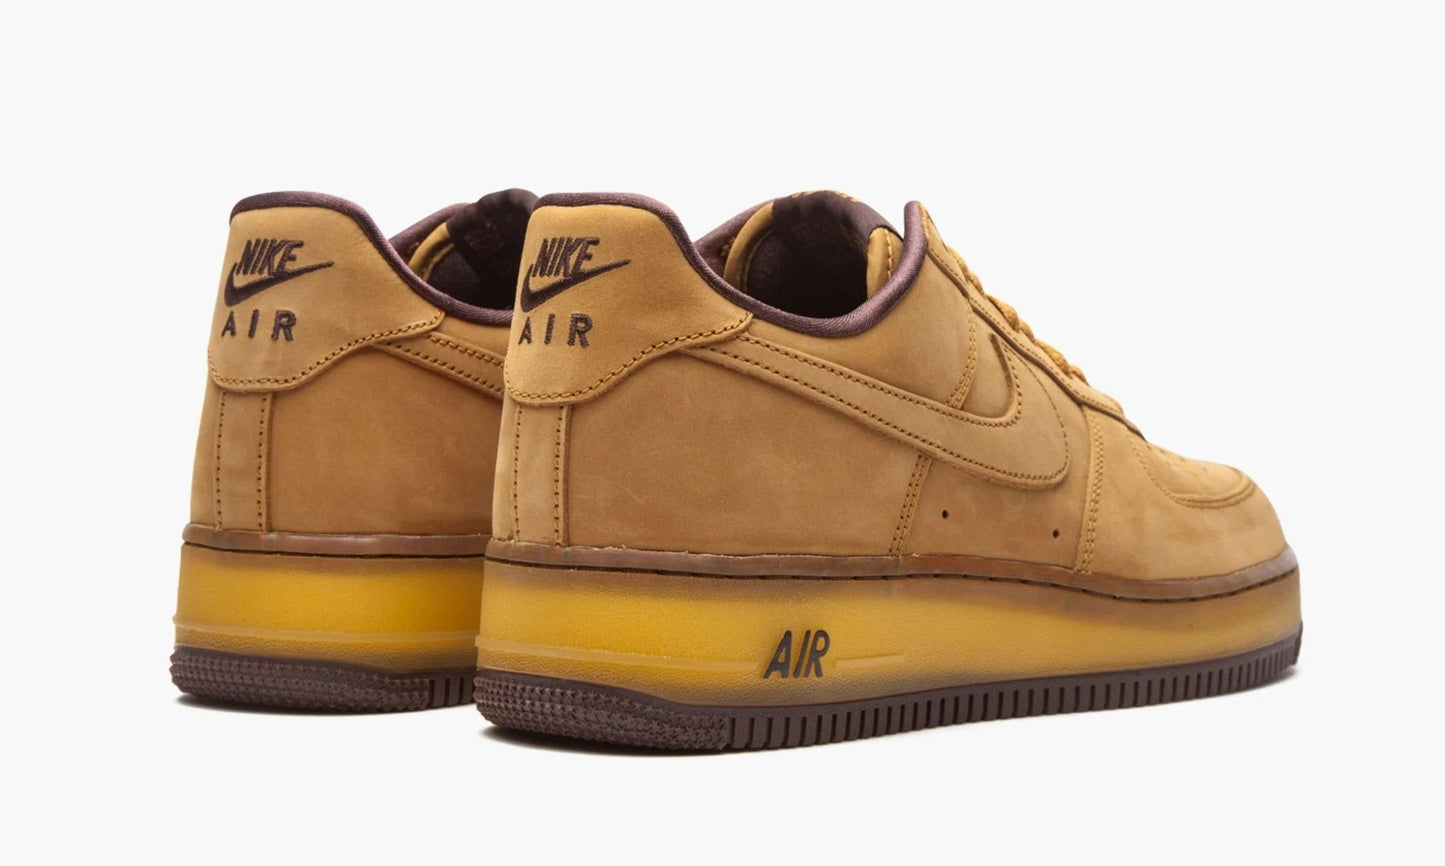 Air Force 1 Low "Wheat" - DC7504 700